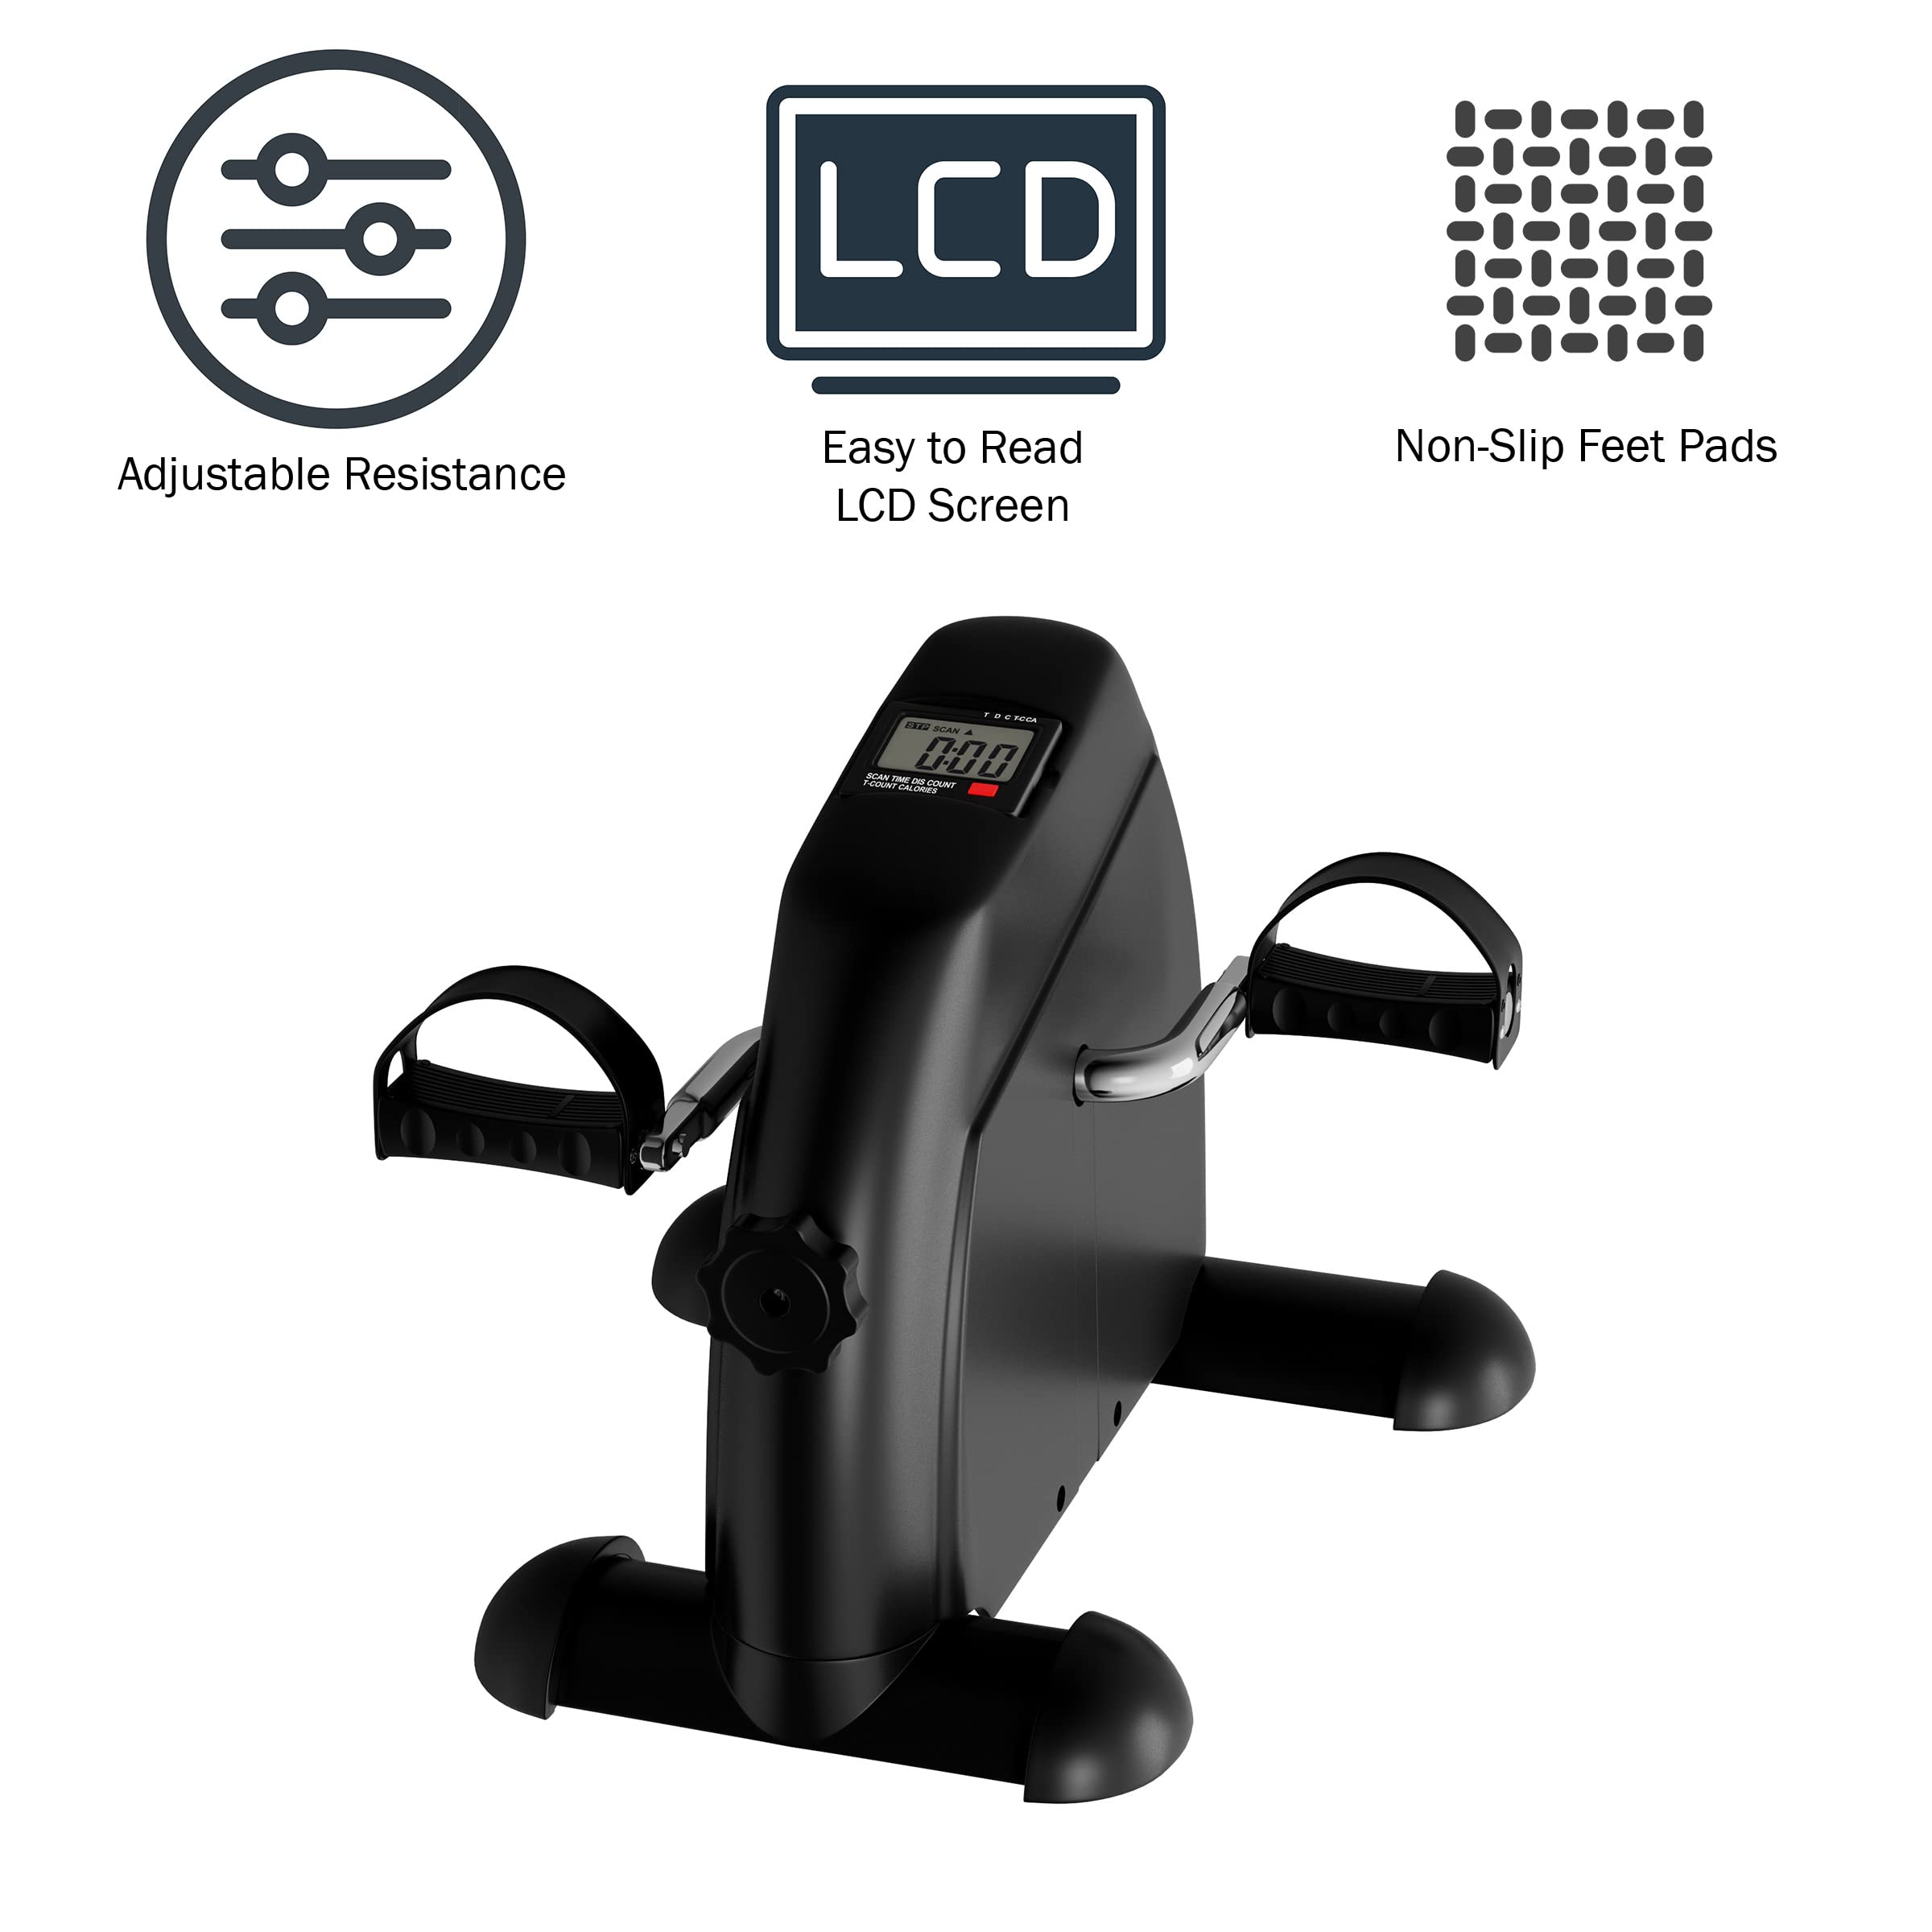 Under Desk Bike and Pedal Exerciser - At-Home Physical Therapy Equipment and Exercise Machine for Arms and Legs with LCD Screen by Wakeman Fitness